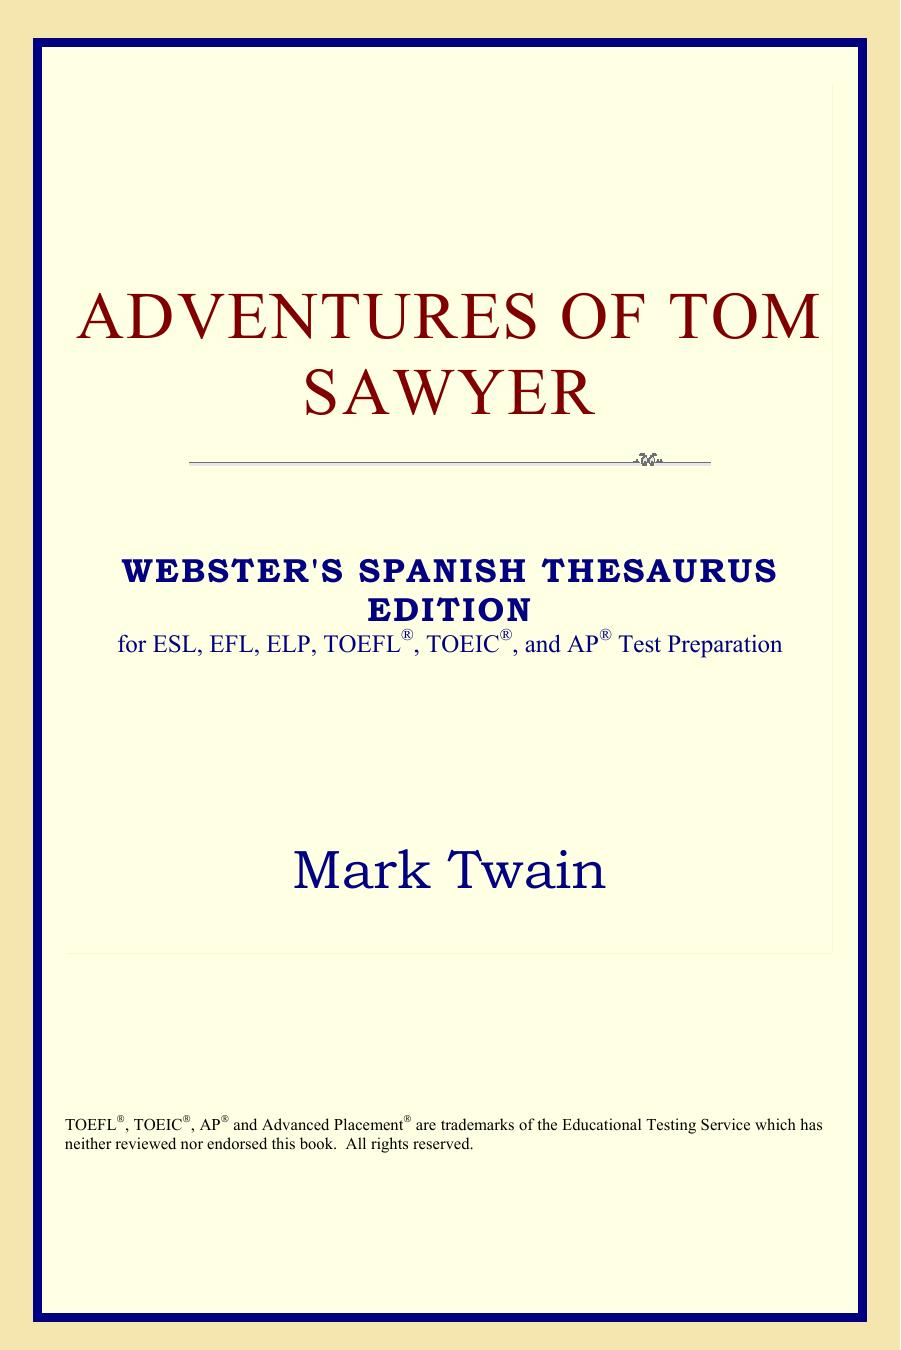 Adventures of Tom Sawyer (Websters Spanish Thesaurus Edition)